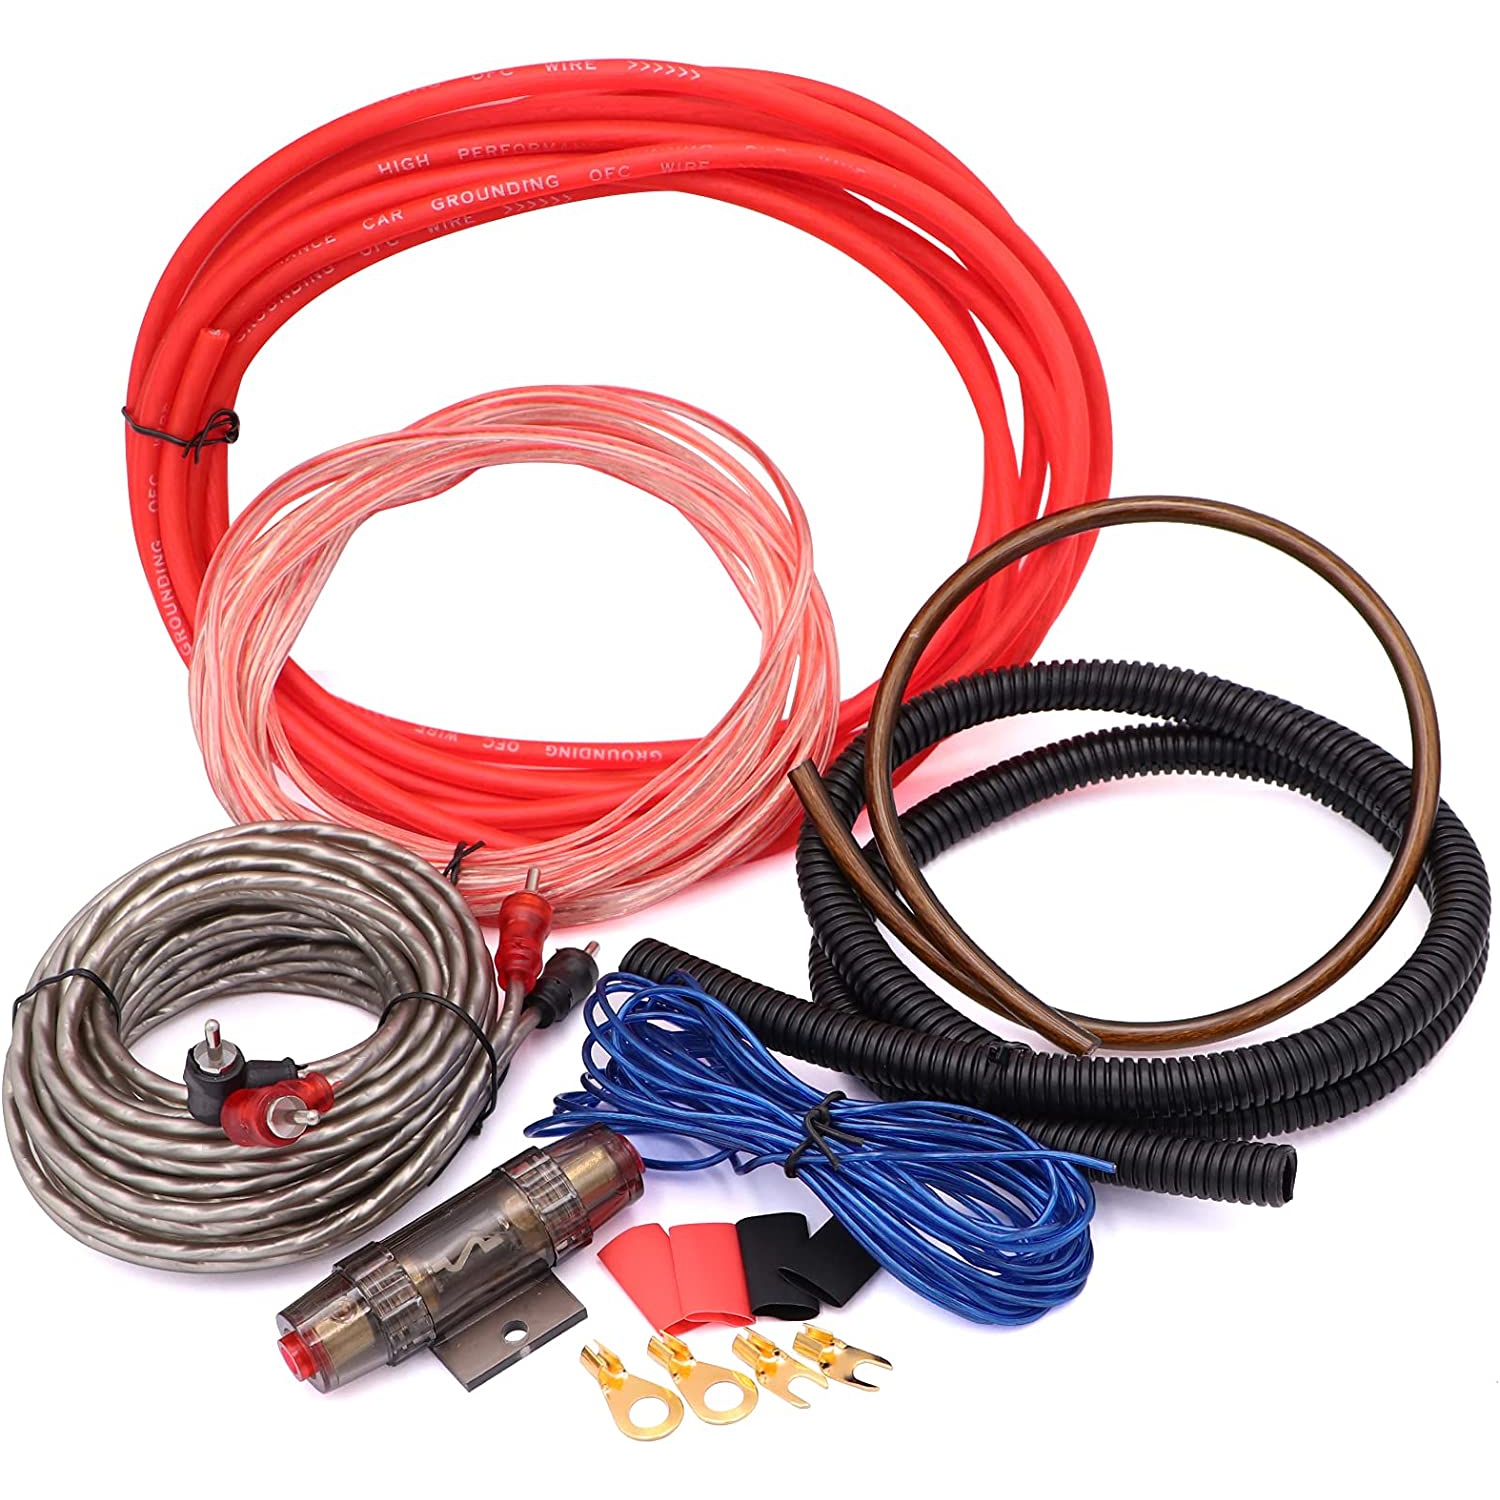 8 Gauge Audio Amplifier Installation Wiring Systems KIT,Make Connections and Brings Power to Your Radio, Subwoofers and Speakers